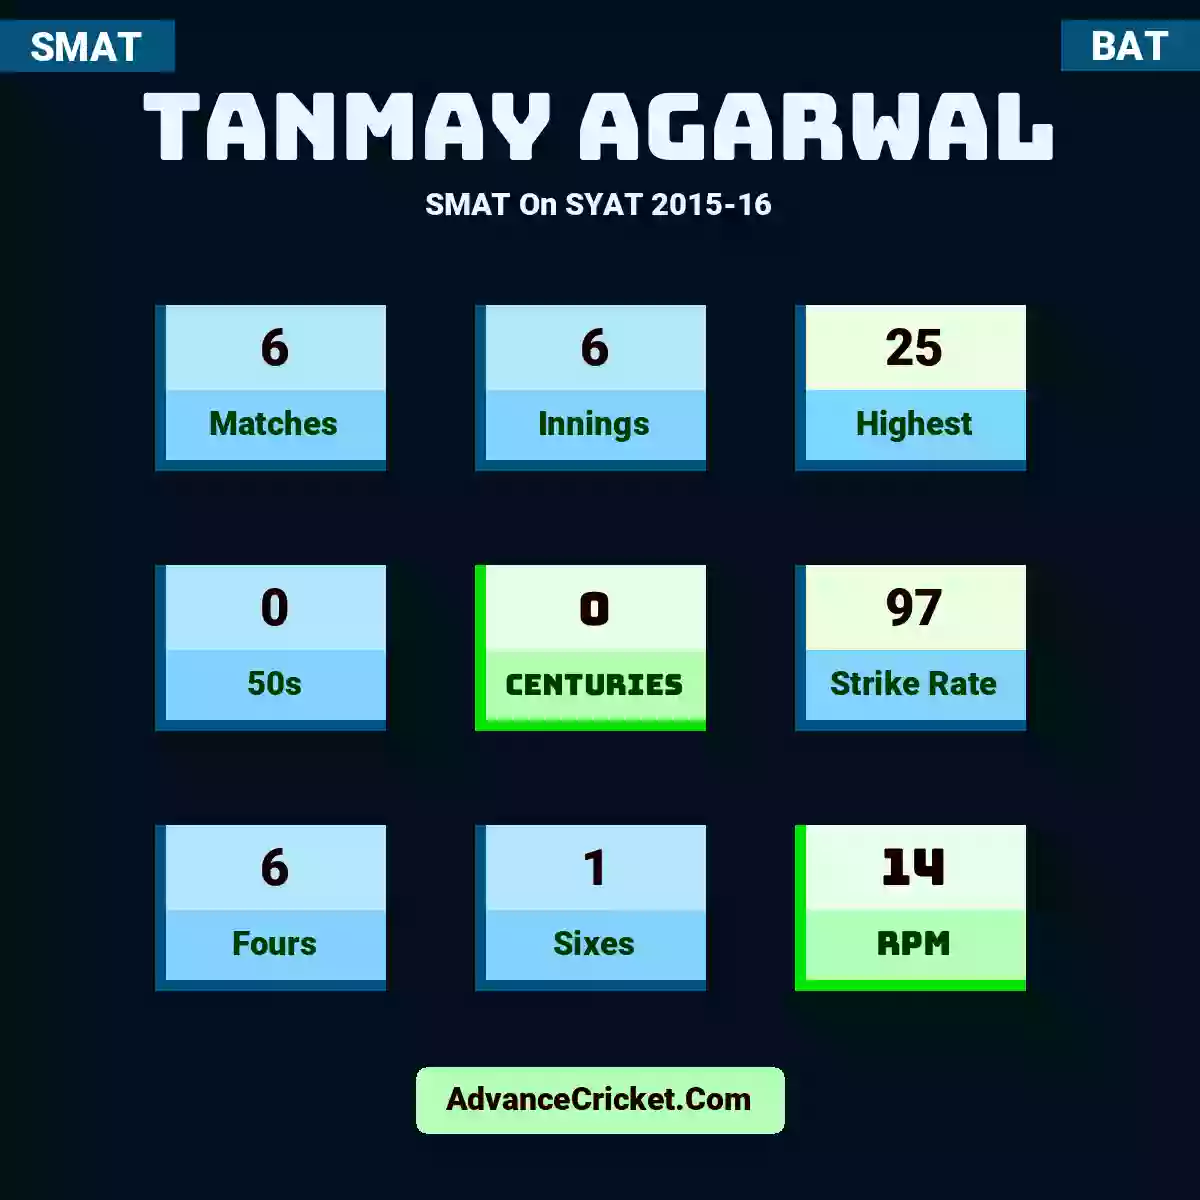 Tanmay Agarwal SMAT  On SYAT 2015-16, Tanmay Agarwal played 6 matches, scored 25 runs as highest, 0 half-centuries, and 0 centuries, with a strike rate of 97. T.Agarwal hit 6 fours and 1 sixes, with an RPM of 14.